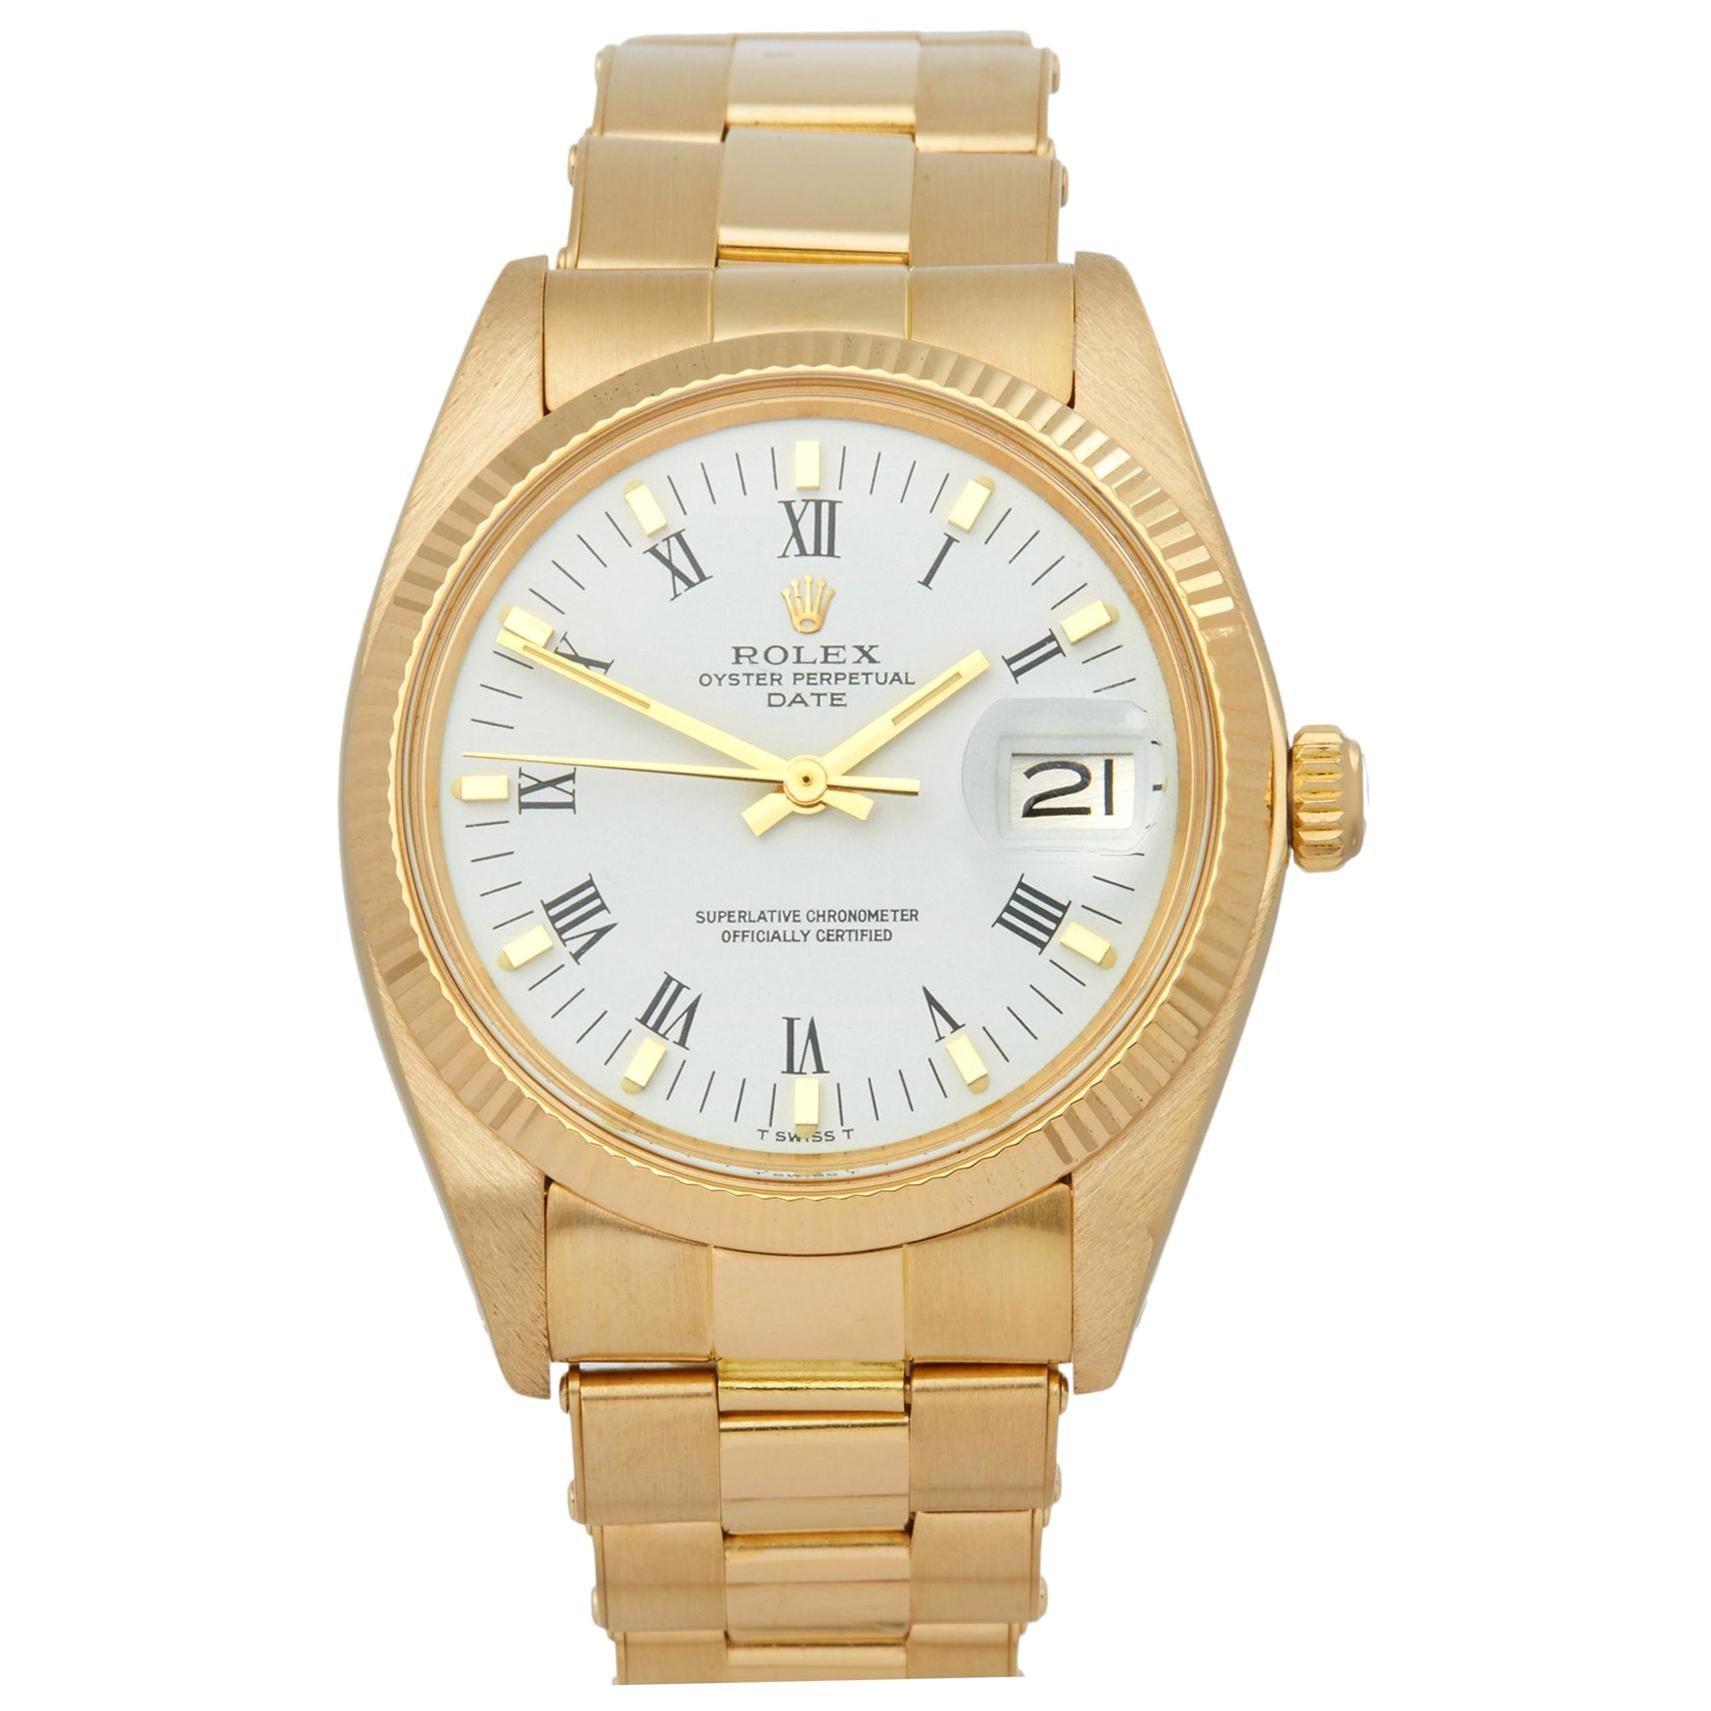 Rolex Oyster Perpetual Date 1503 Unisex Yellow Gold Watch